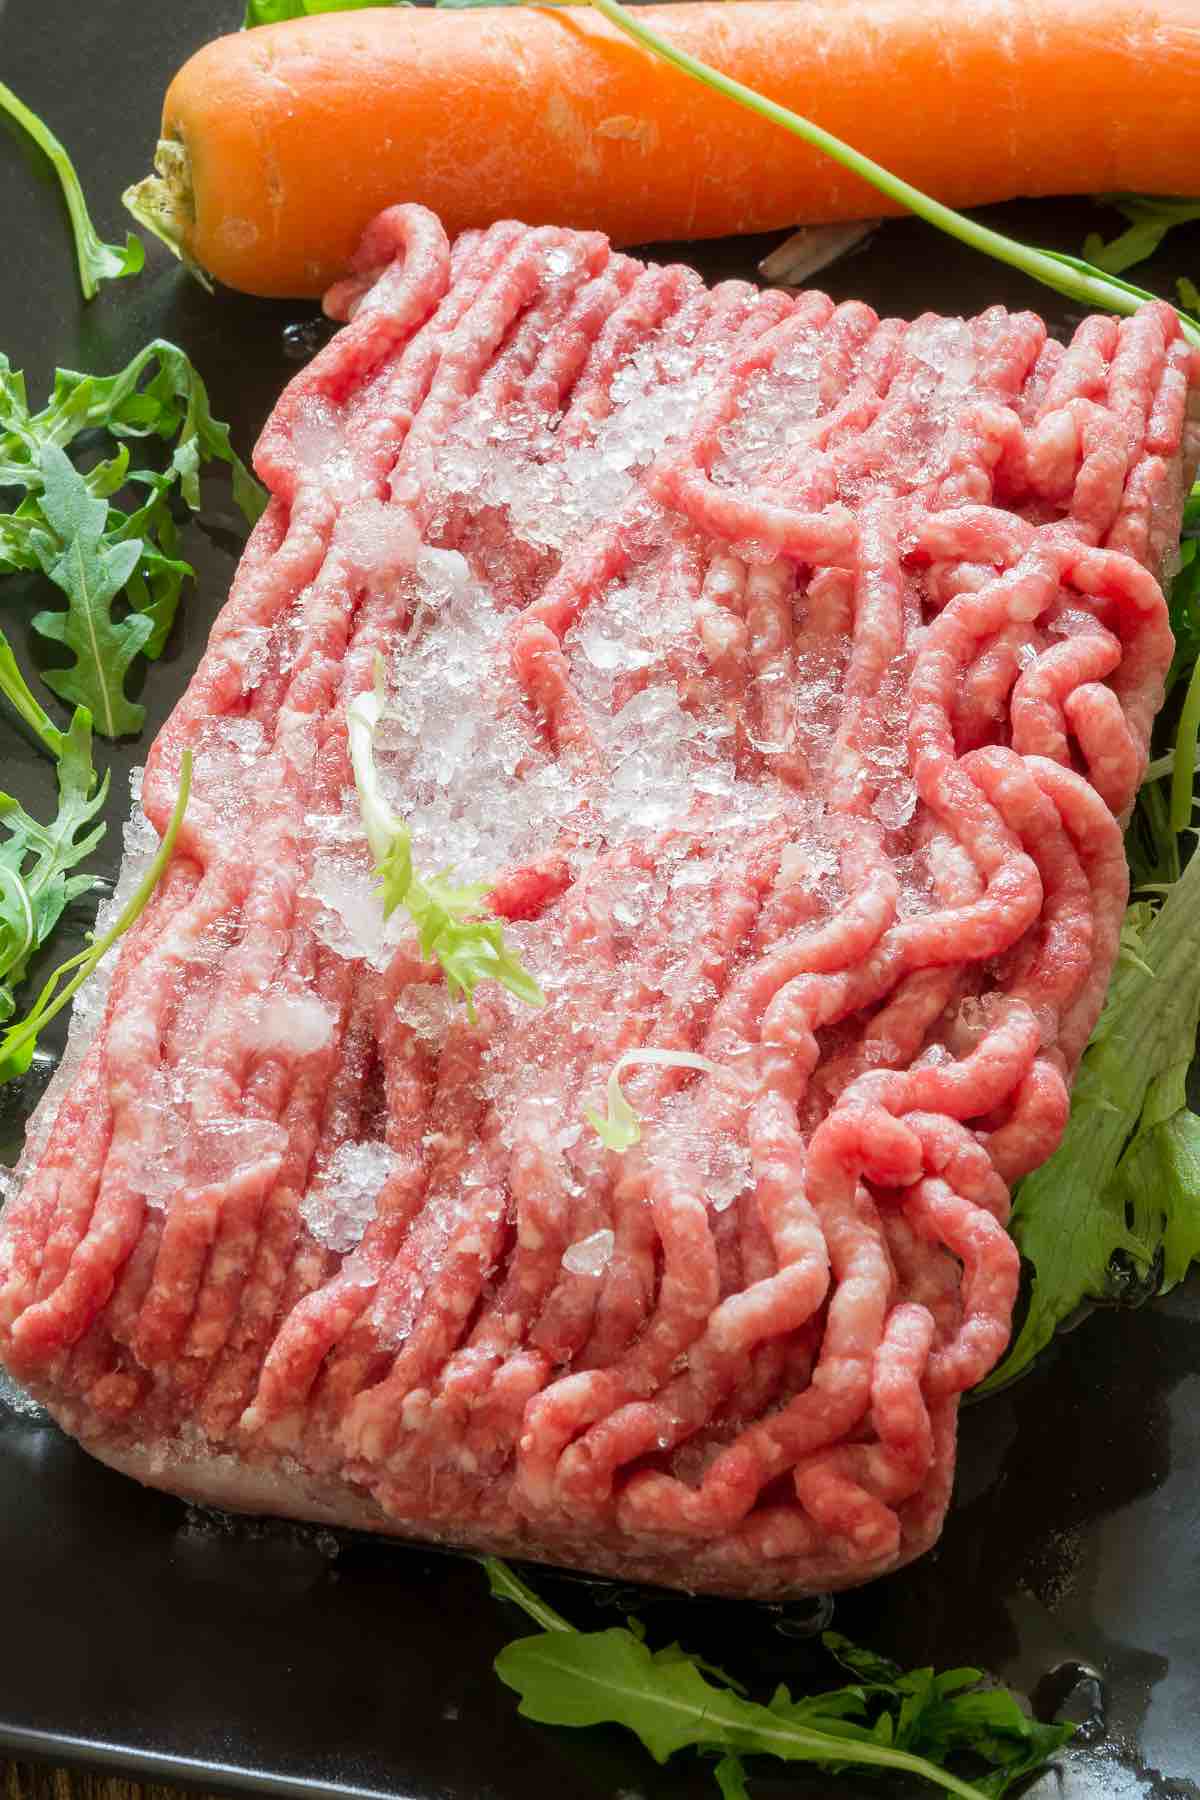 How to Defrost Ground Beef in Microwave Without Cooking It? 